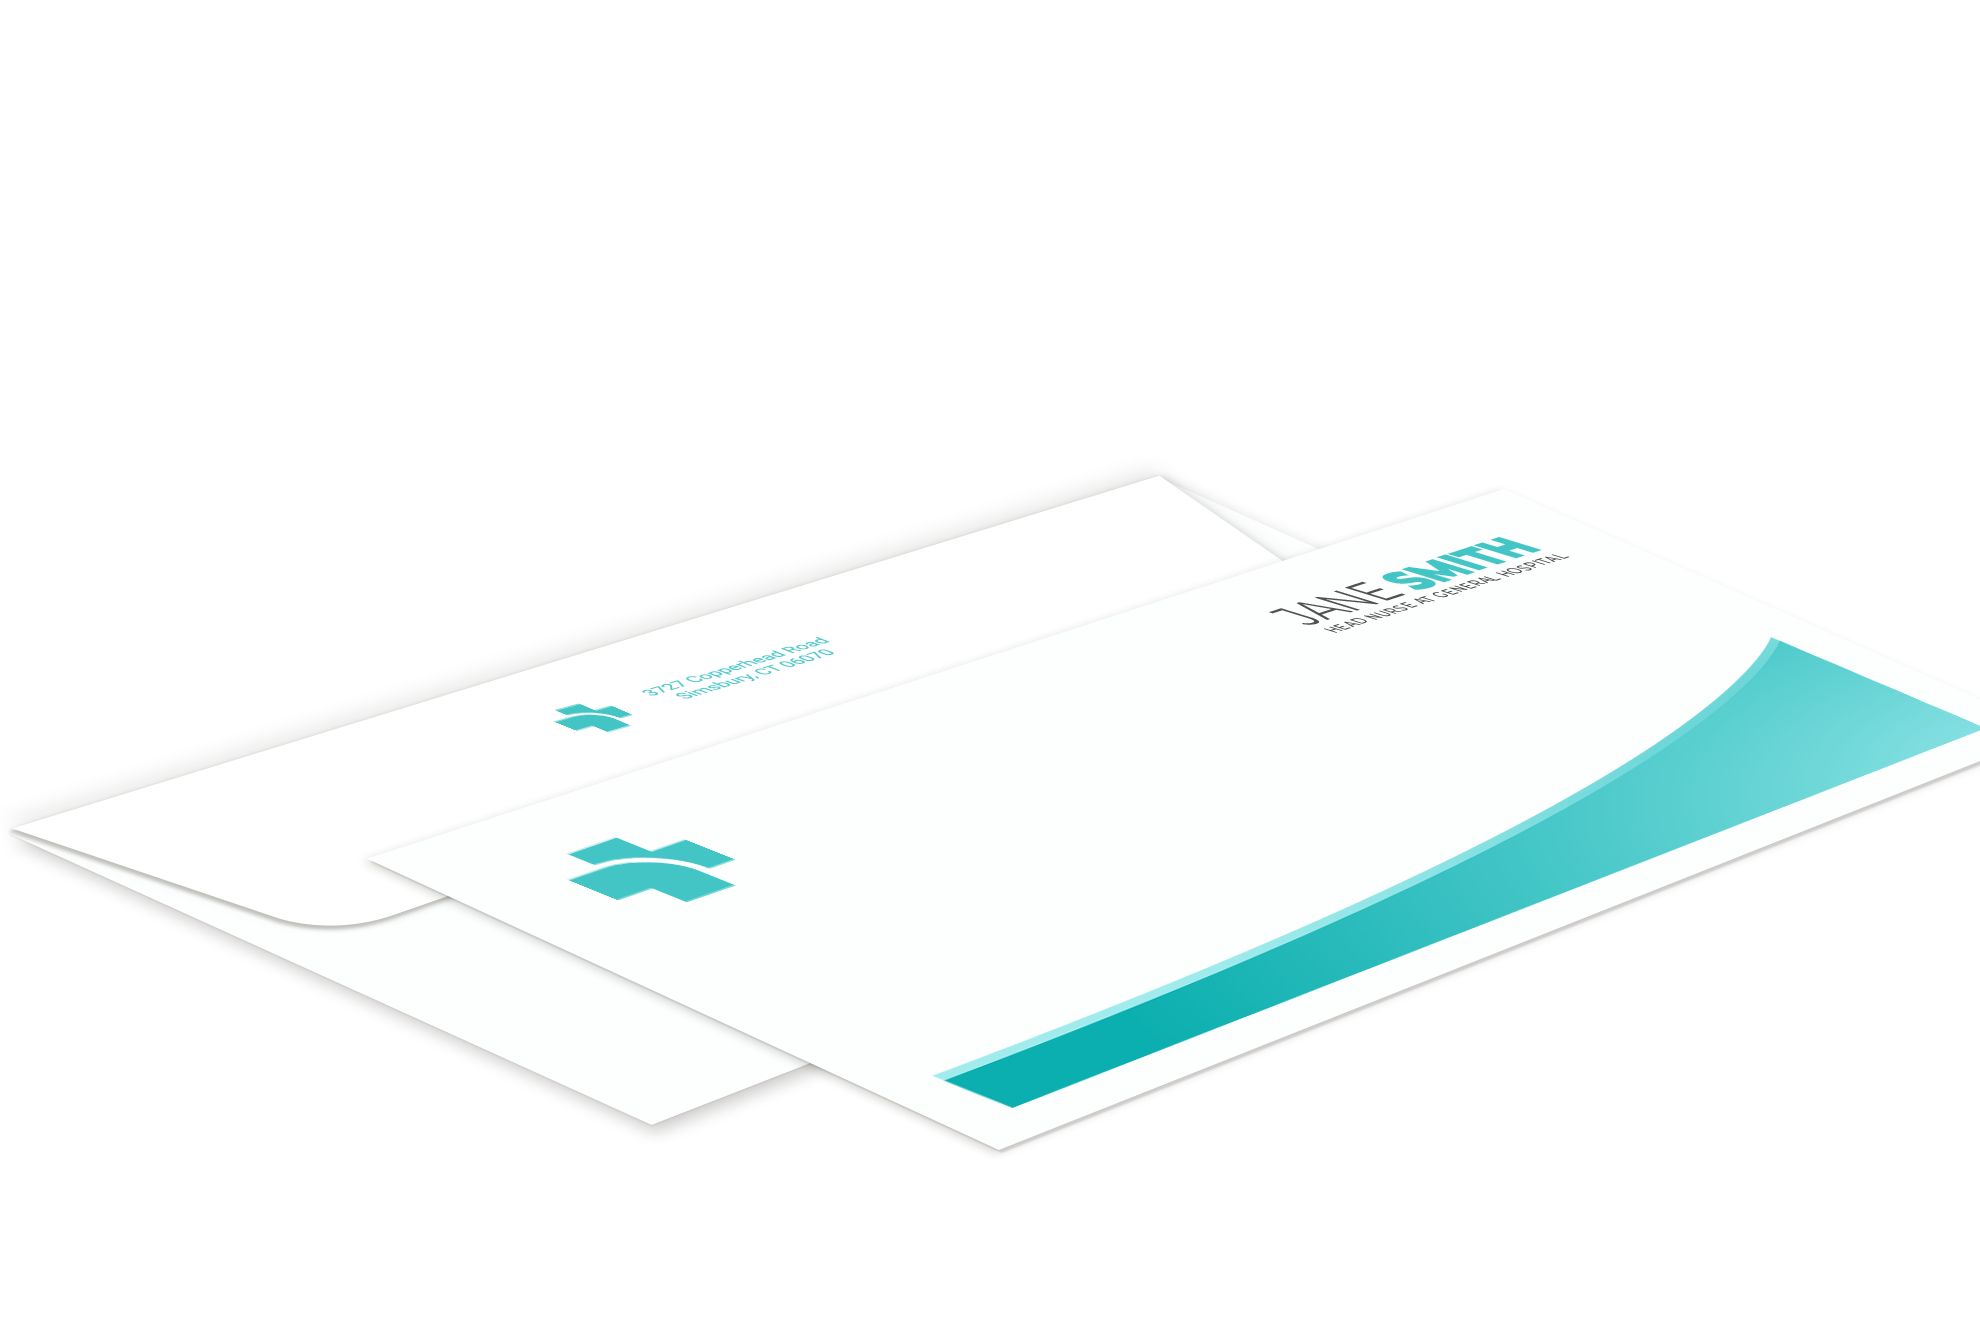 Envelopes for medical records: * For important communications
* With or without window
* Templates …